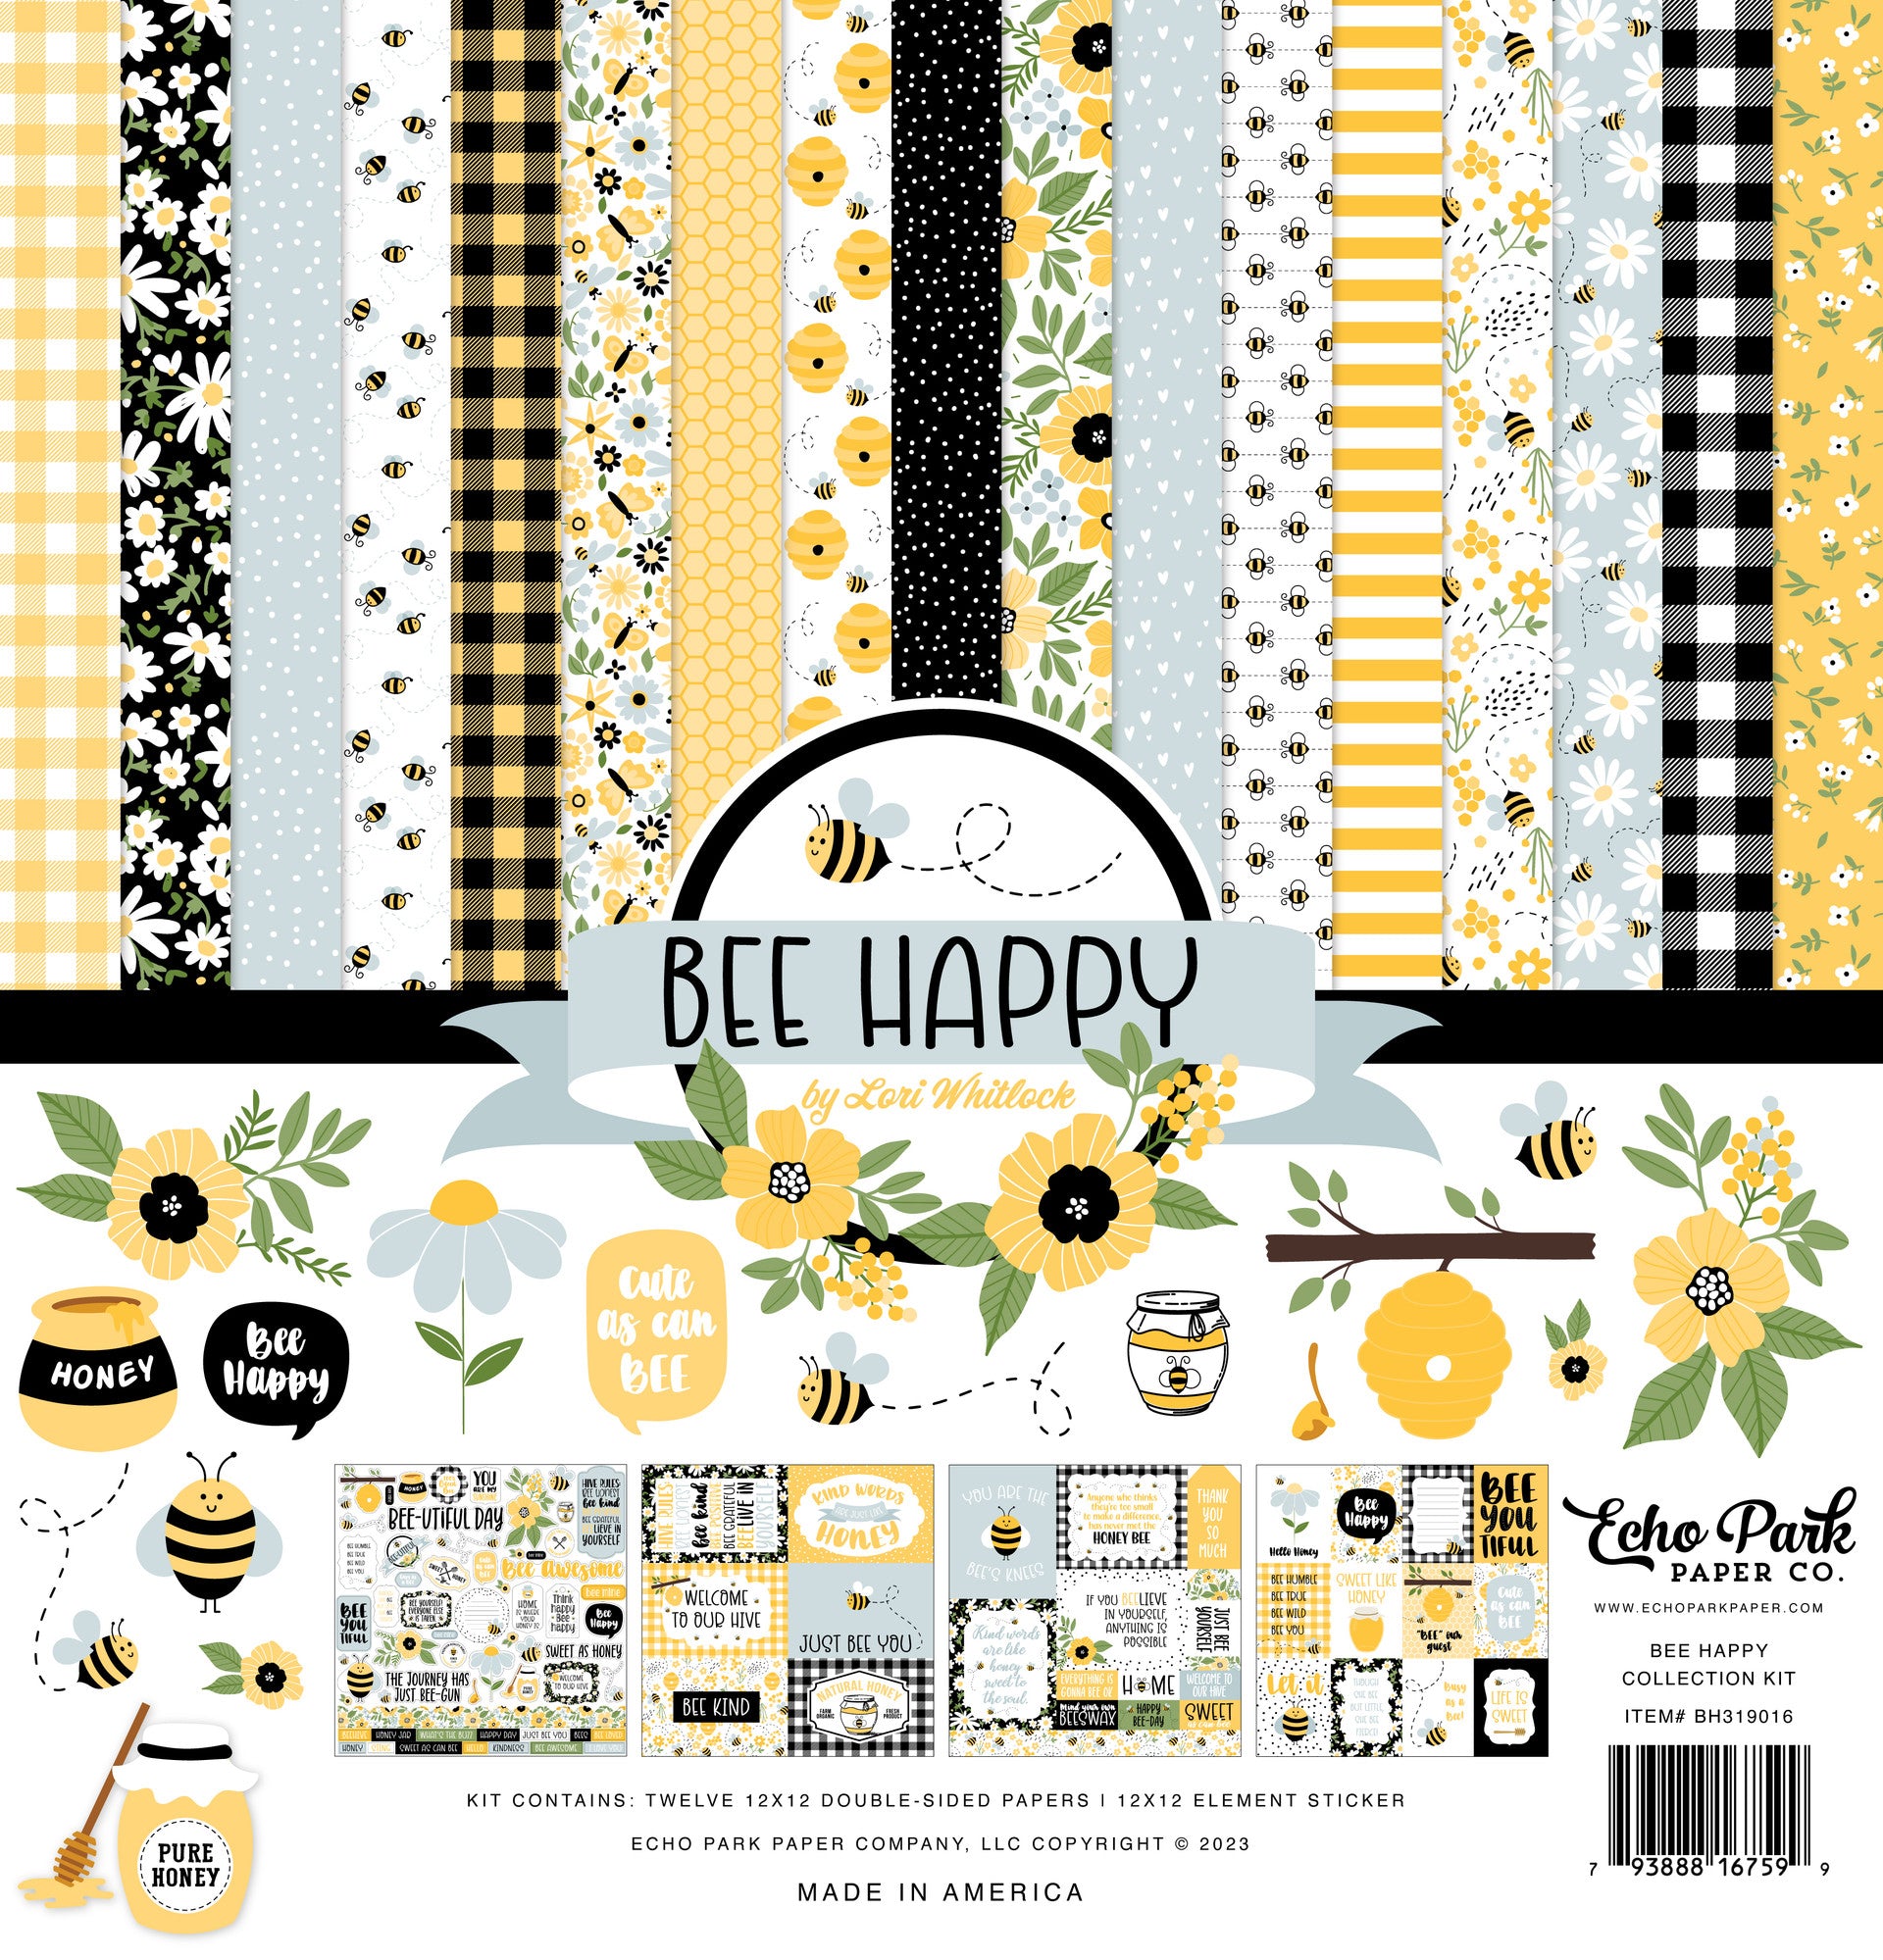 Bee Happy Collection Kit